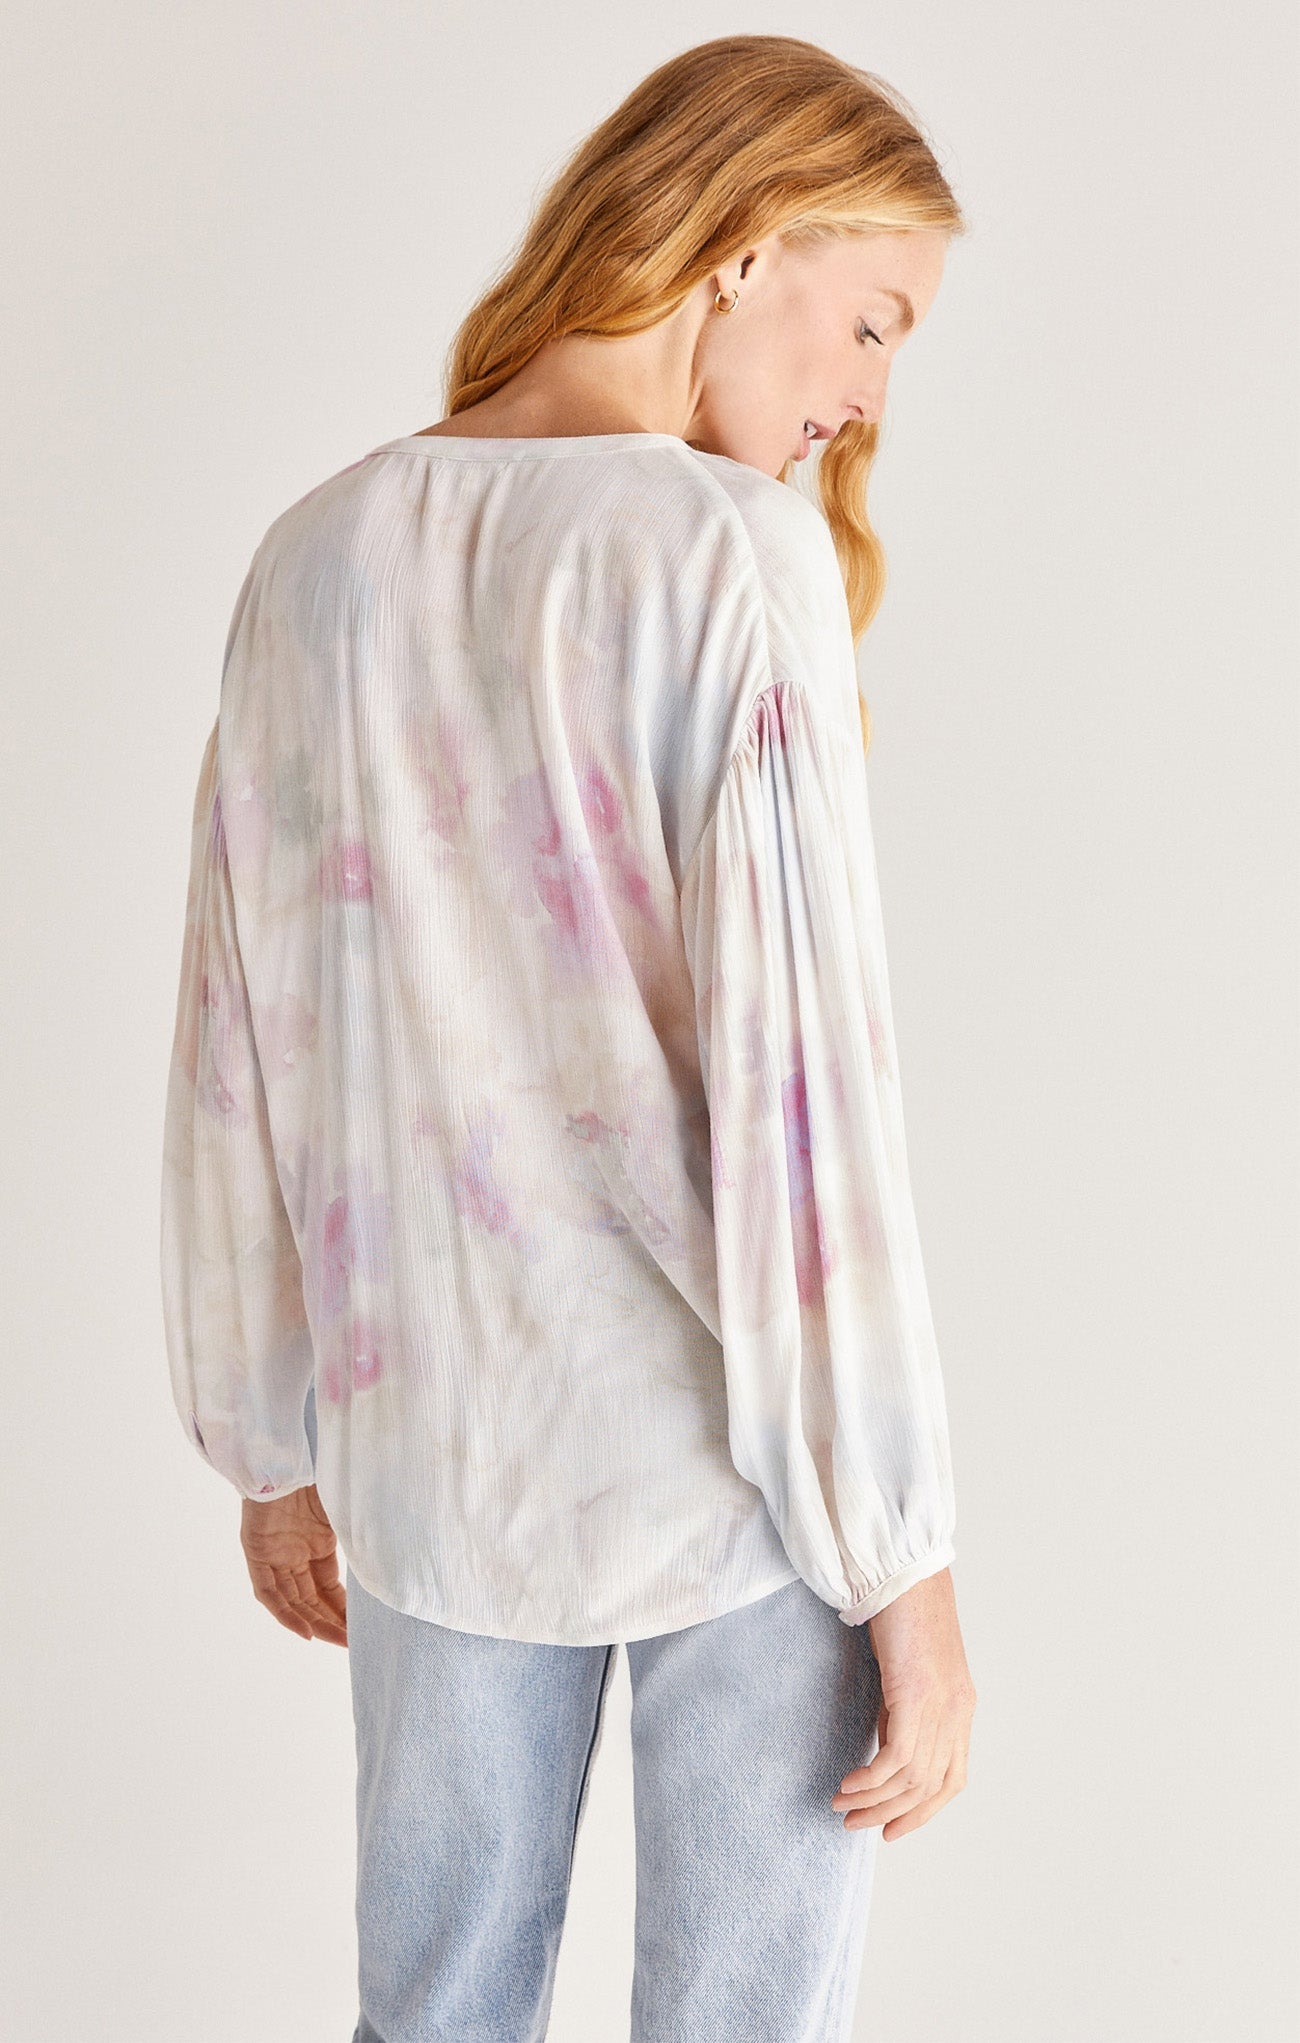 Bayfront Blurred Woven Top - Multi